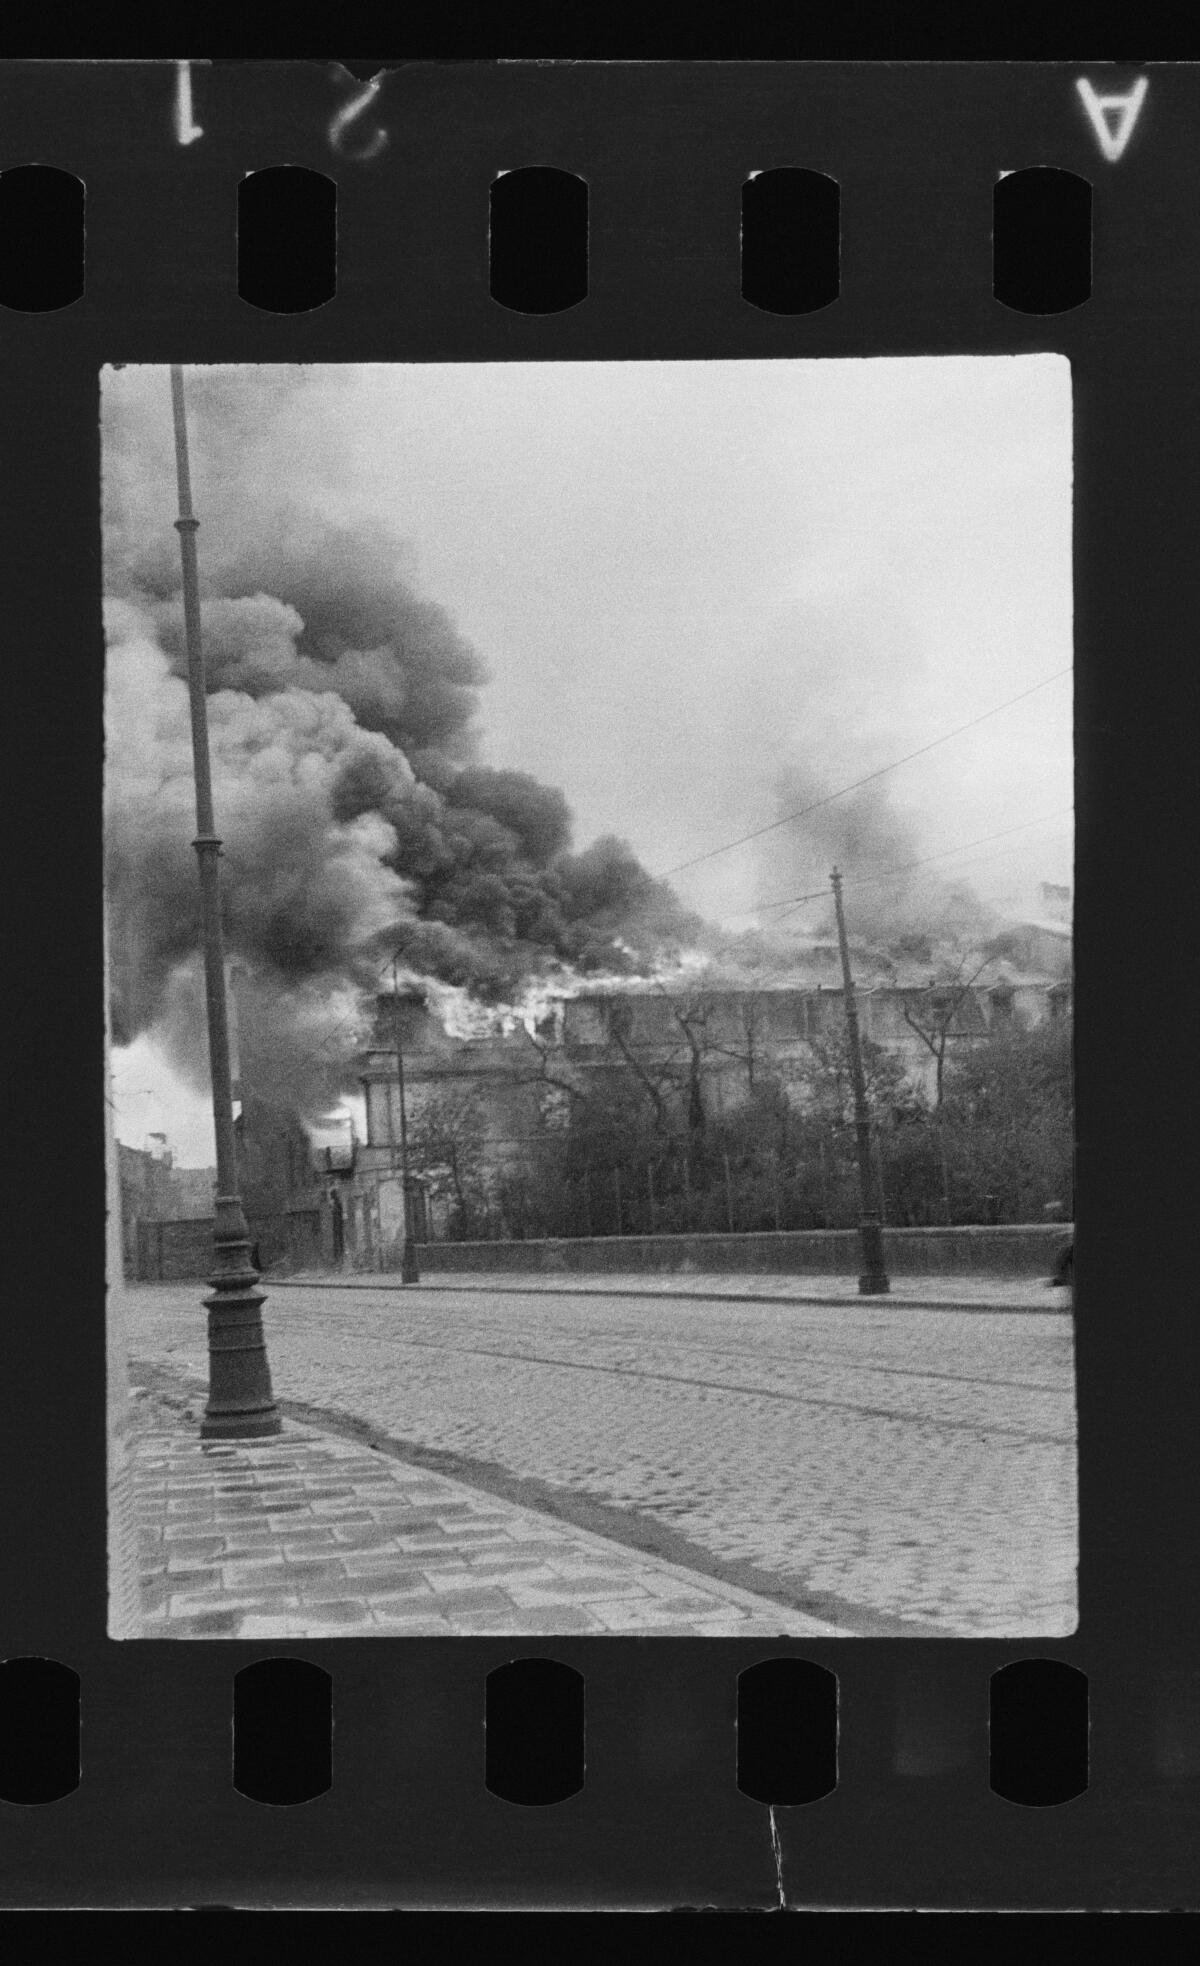 Smoke billows from buildings on a Warsaw street in 1943